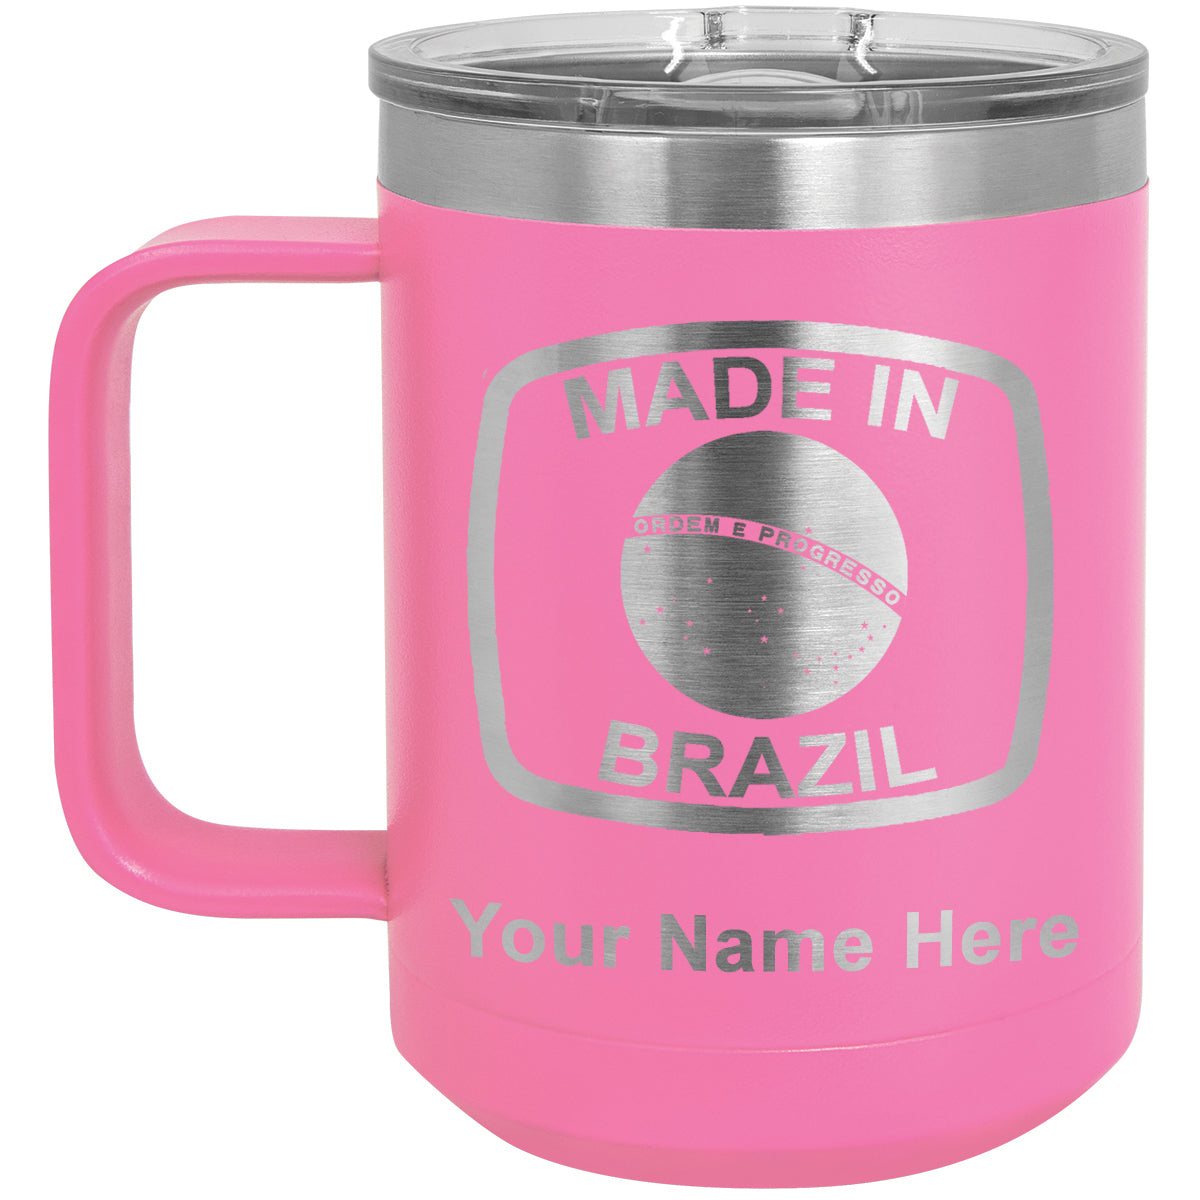 15oz Vacuum Insulated Coffee Mug, Made in Brazil, Personalized Engraving Included